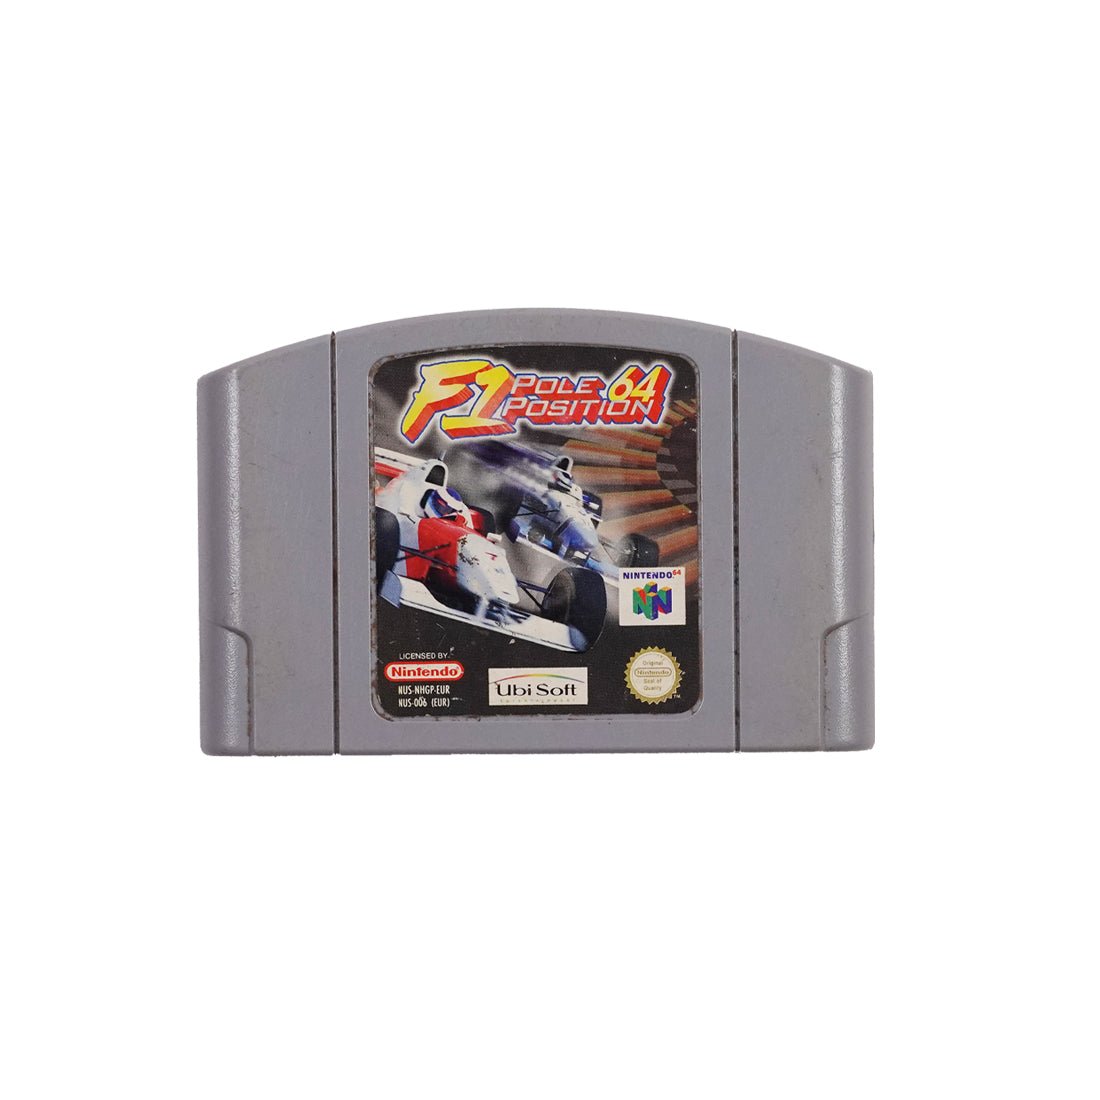 (Pre-Owned) F1 Pole Position 64 - Nintendo 64 - Store 974 | ستور ٩٧٤